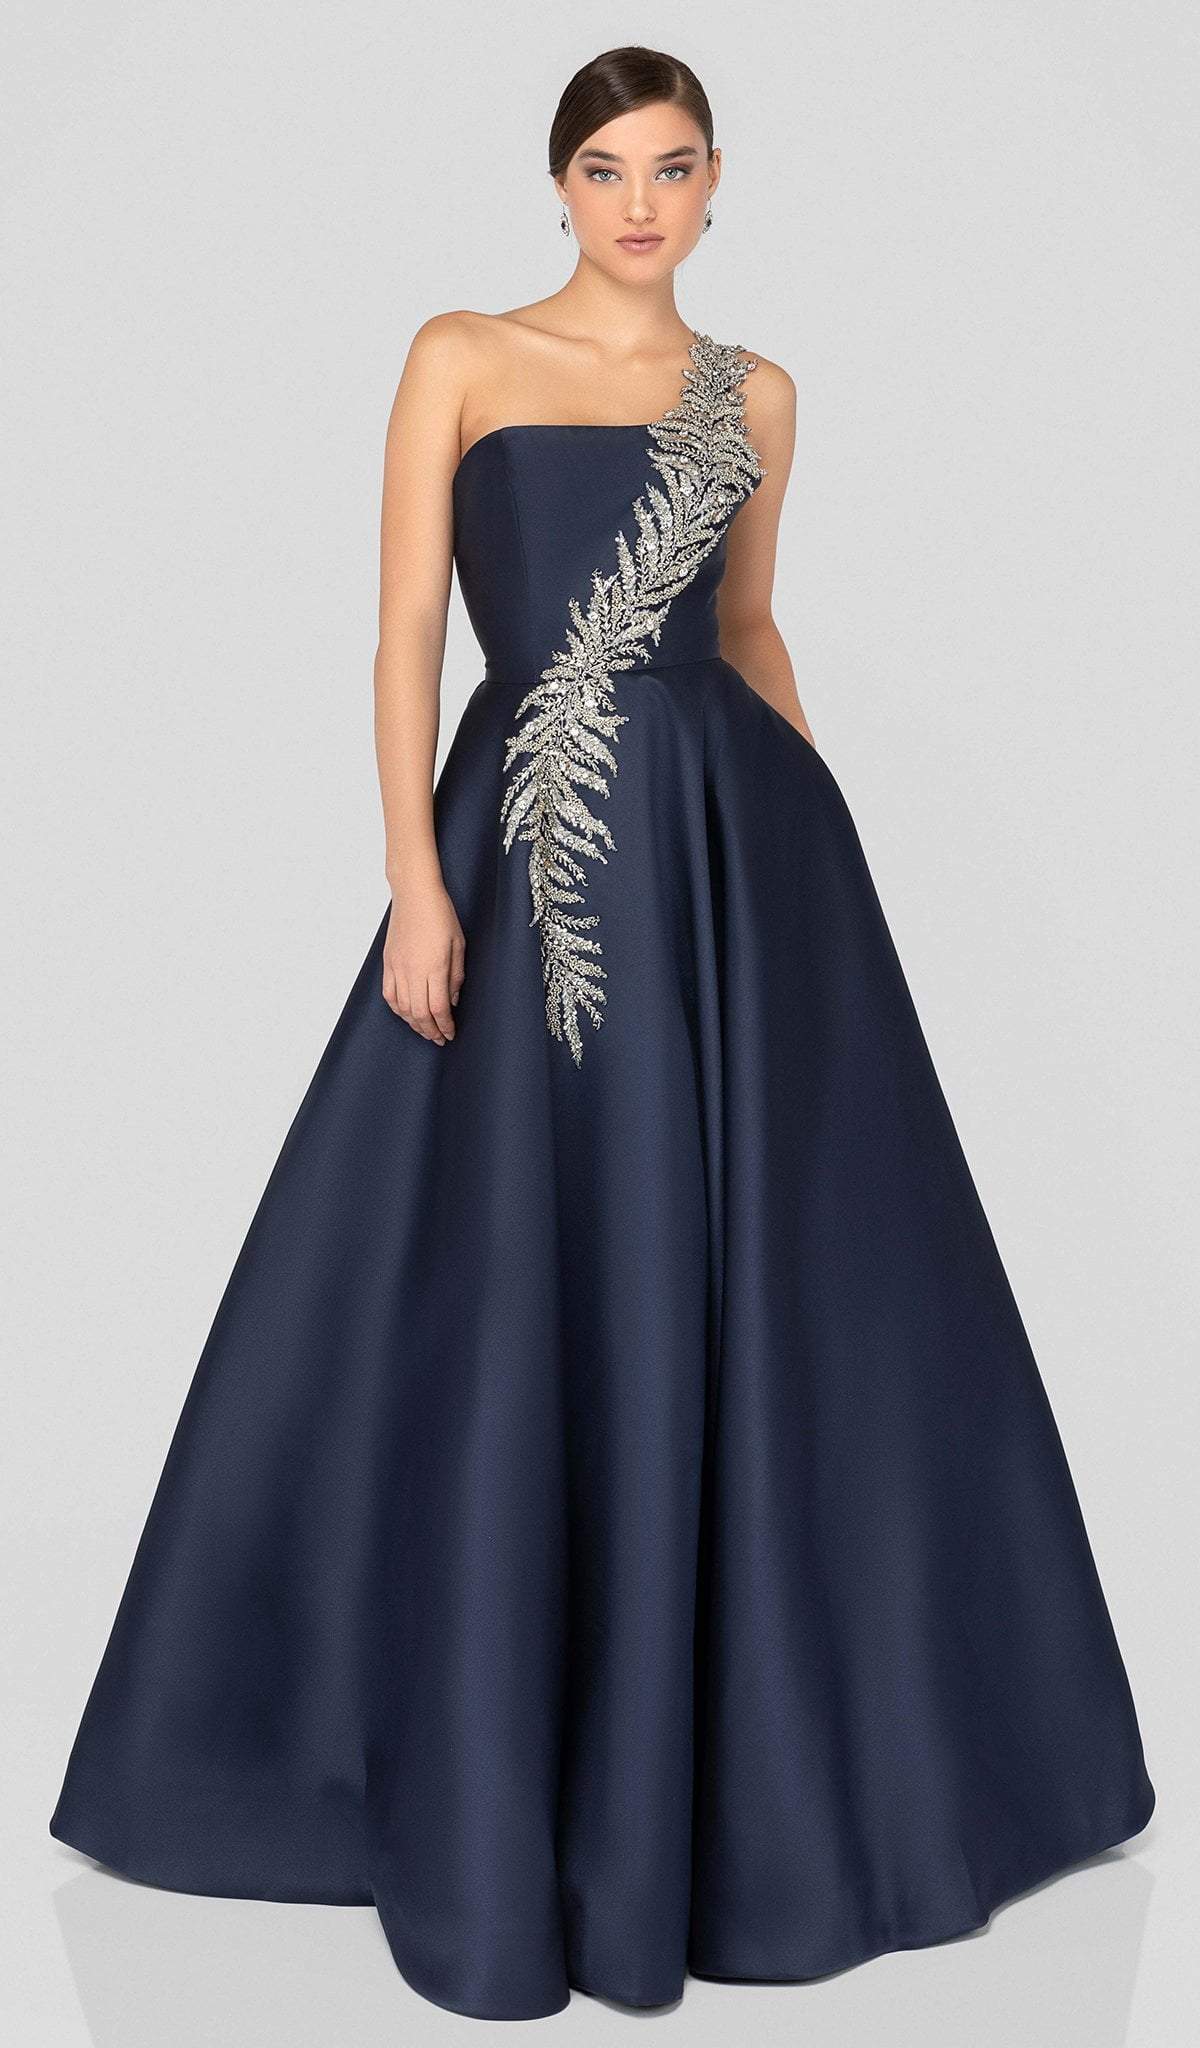 Terani Couture - 1912E9202 One Shoulder Dazzling Fern Accent Gown Evening Dresses 0 / Navy